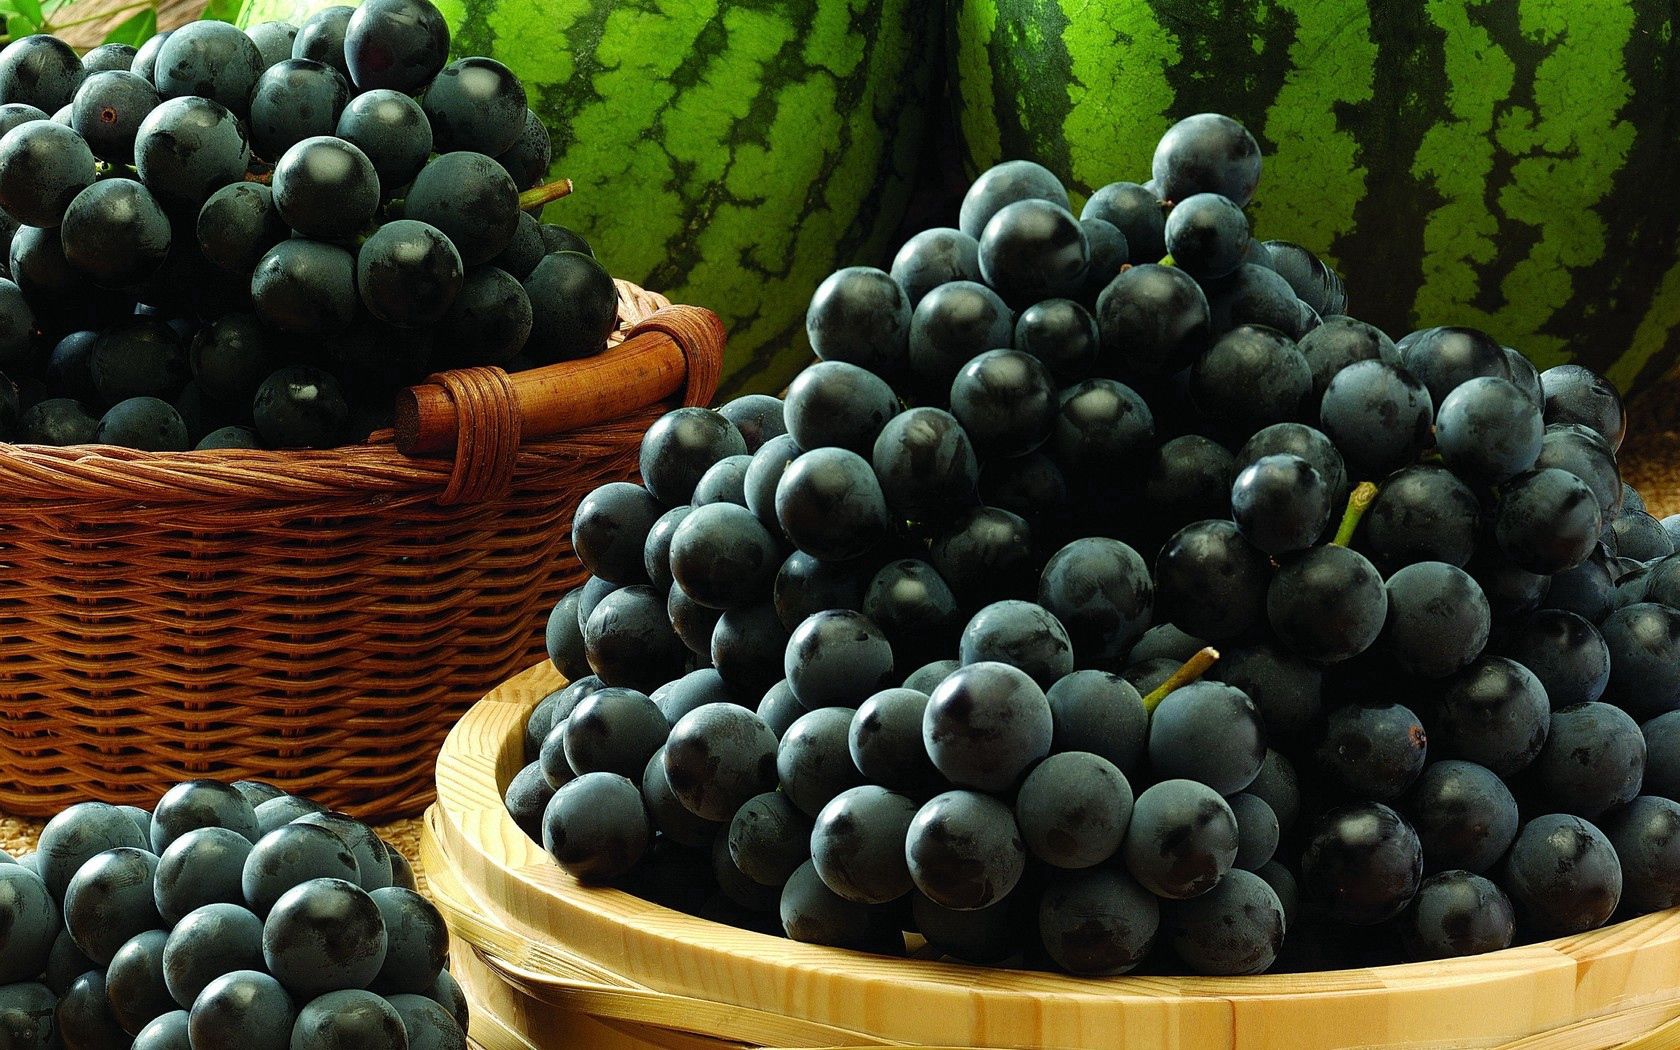 grapes, food, watermelons, black, berry, basket